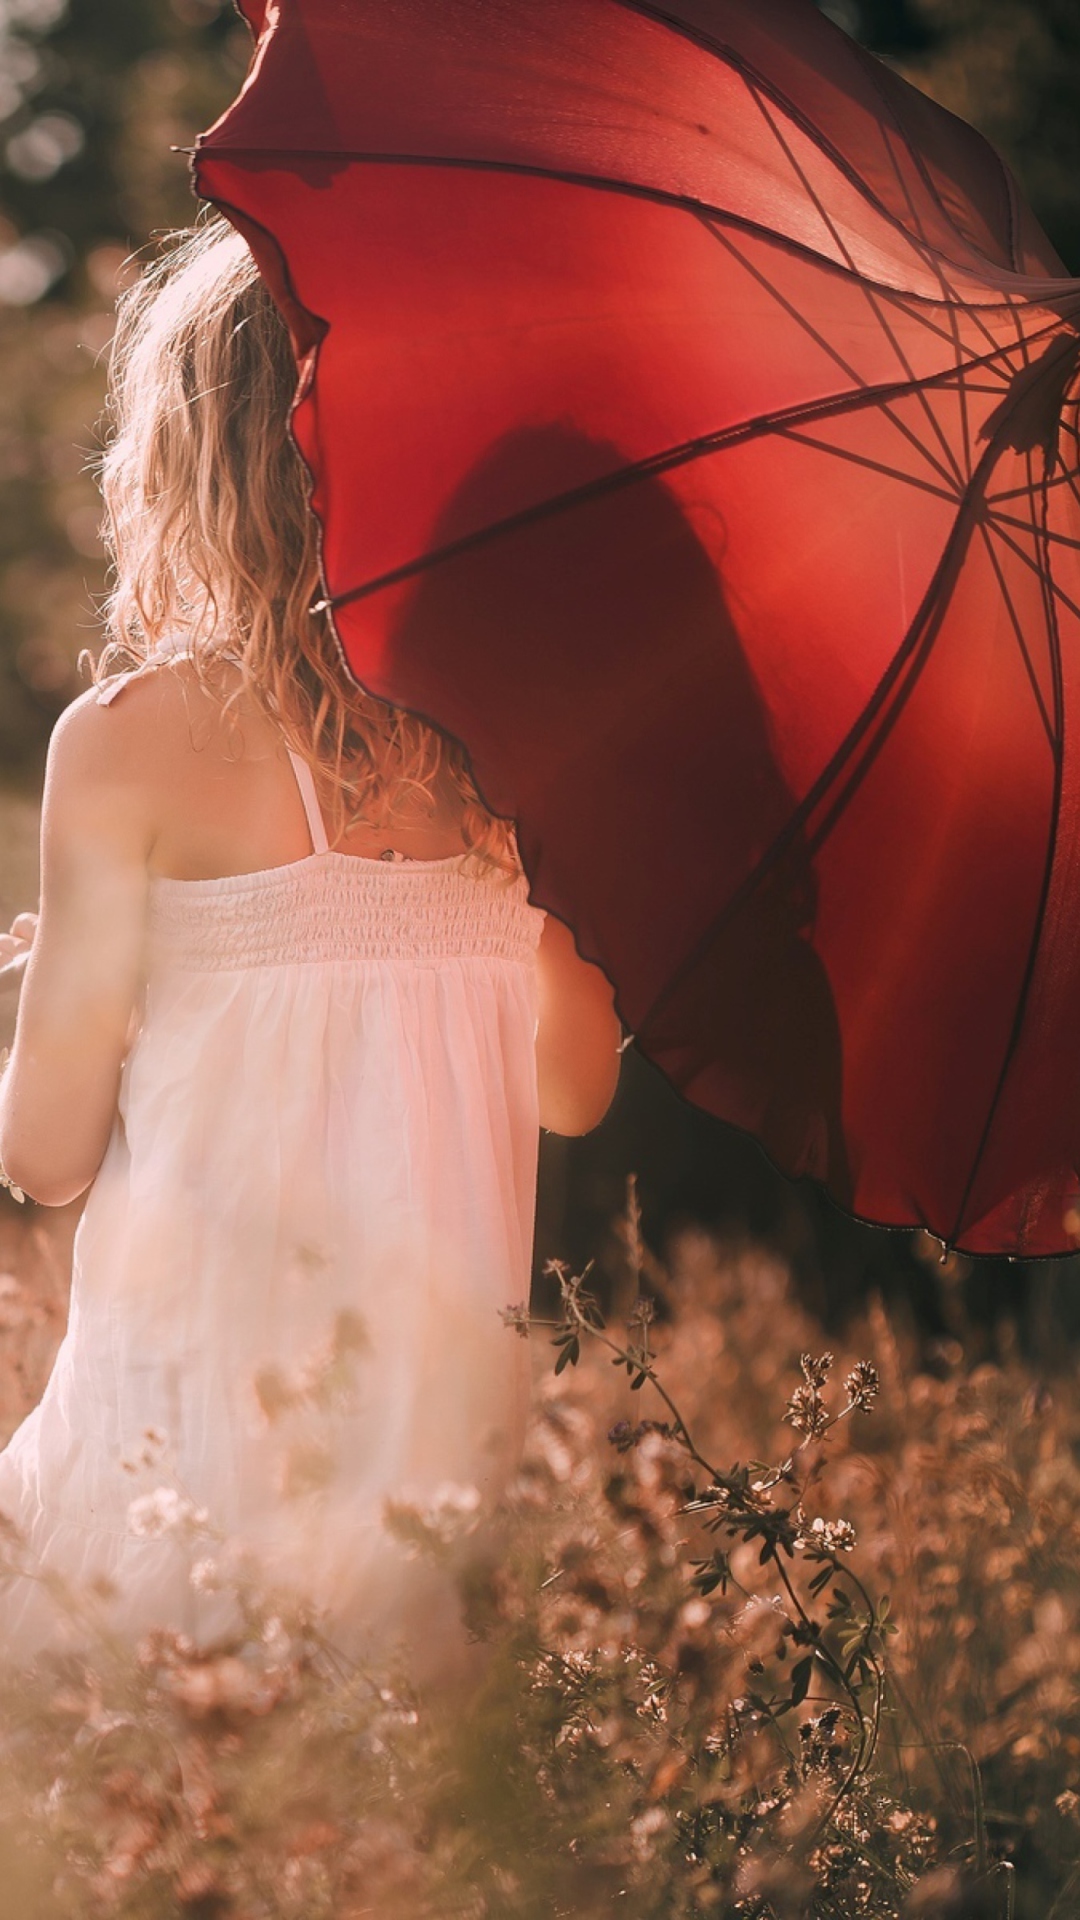 Girl With Red Umbrella wallpaper 1080x1920